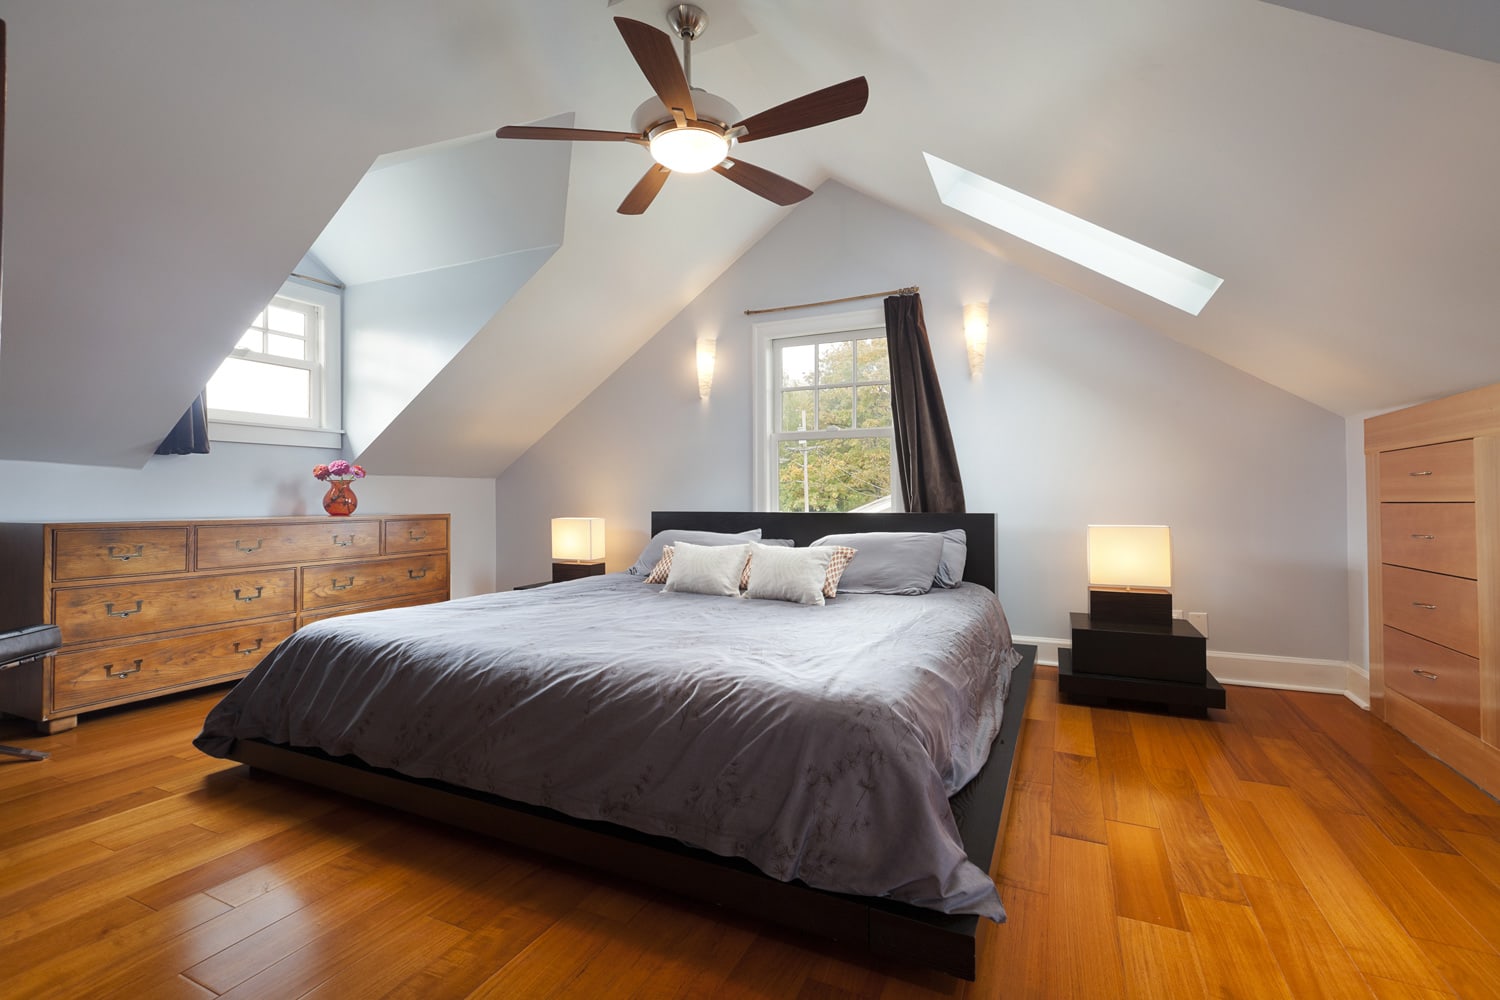 Master bedroom in large attic space.